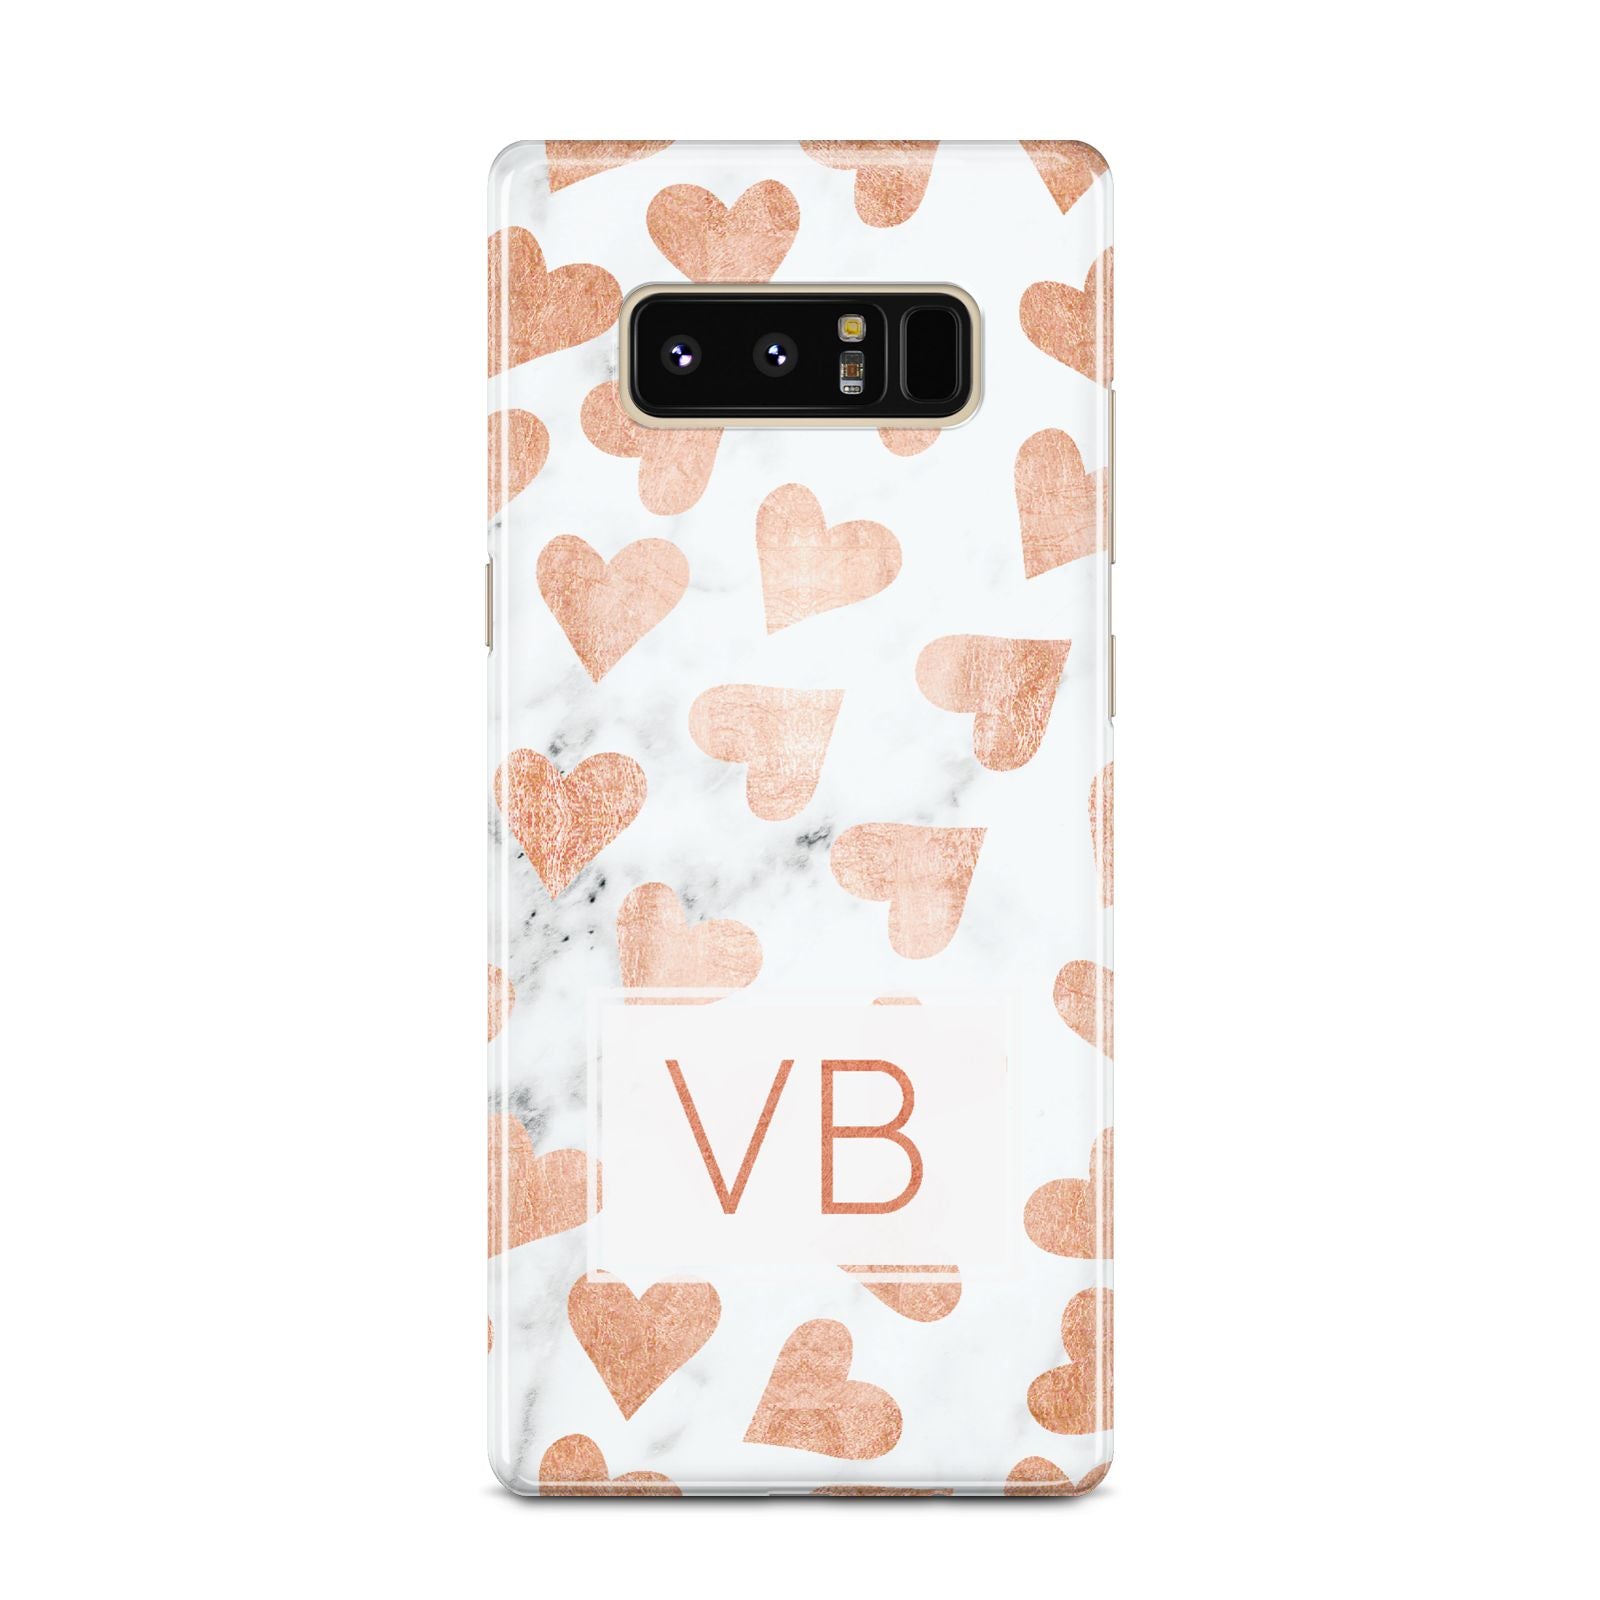 Personalised Heart Initialled Marble Samsung Galaxy Note 8 Case